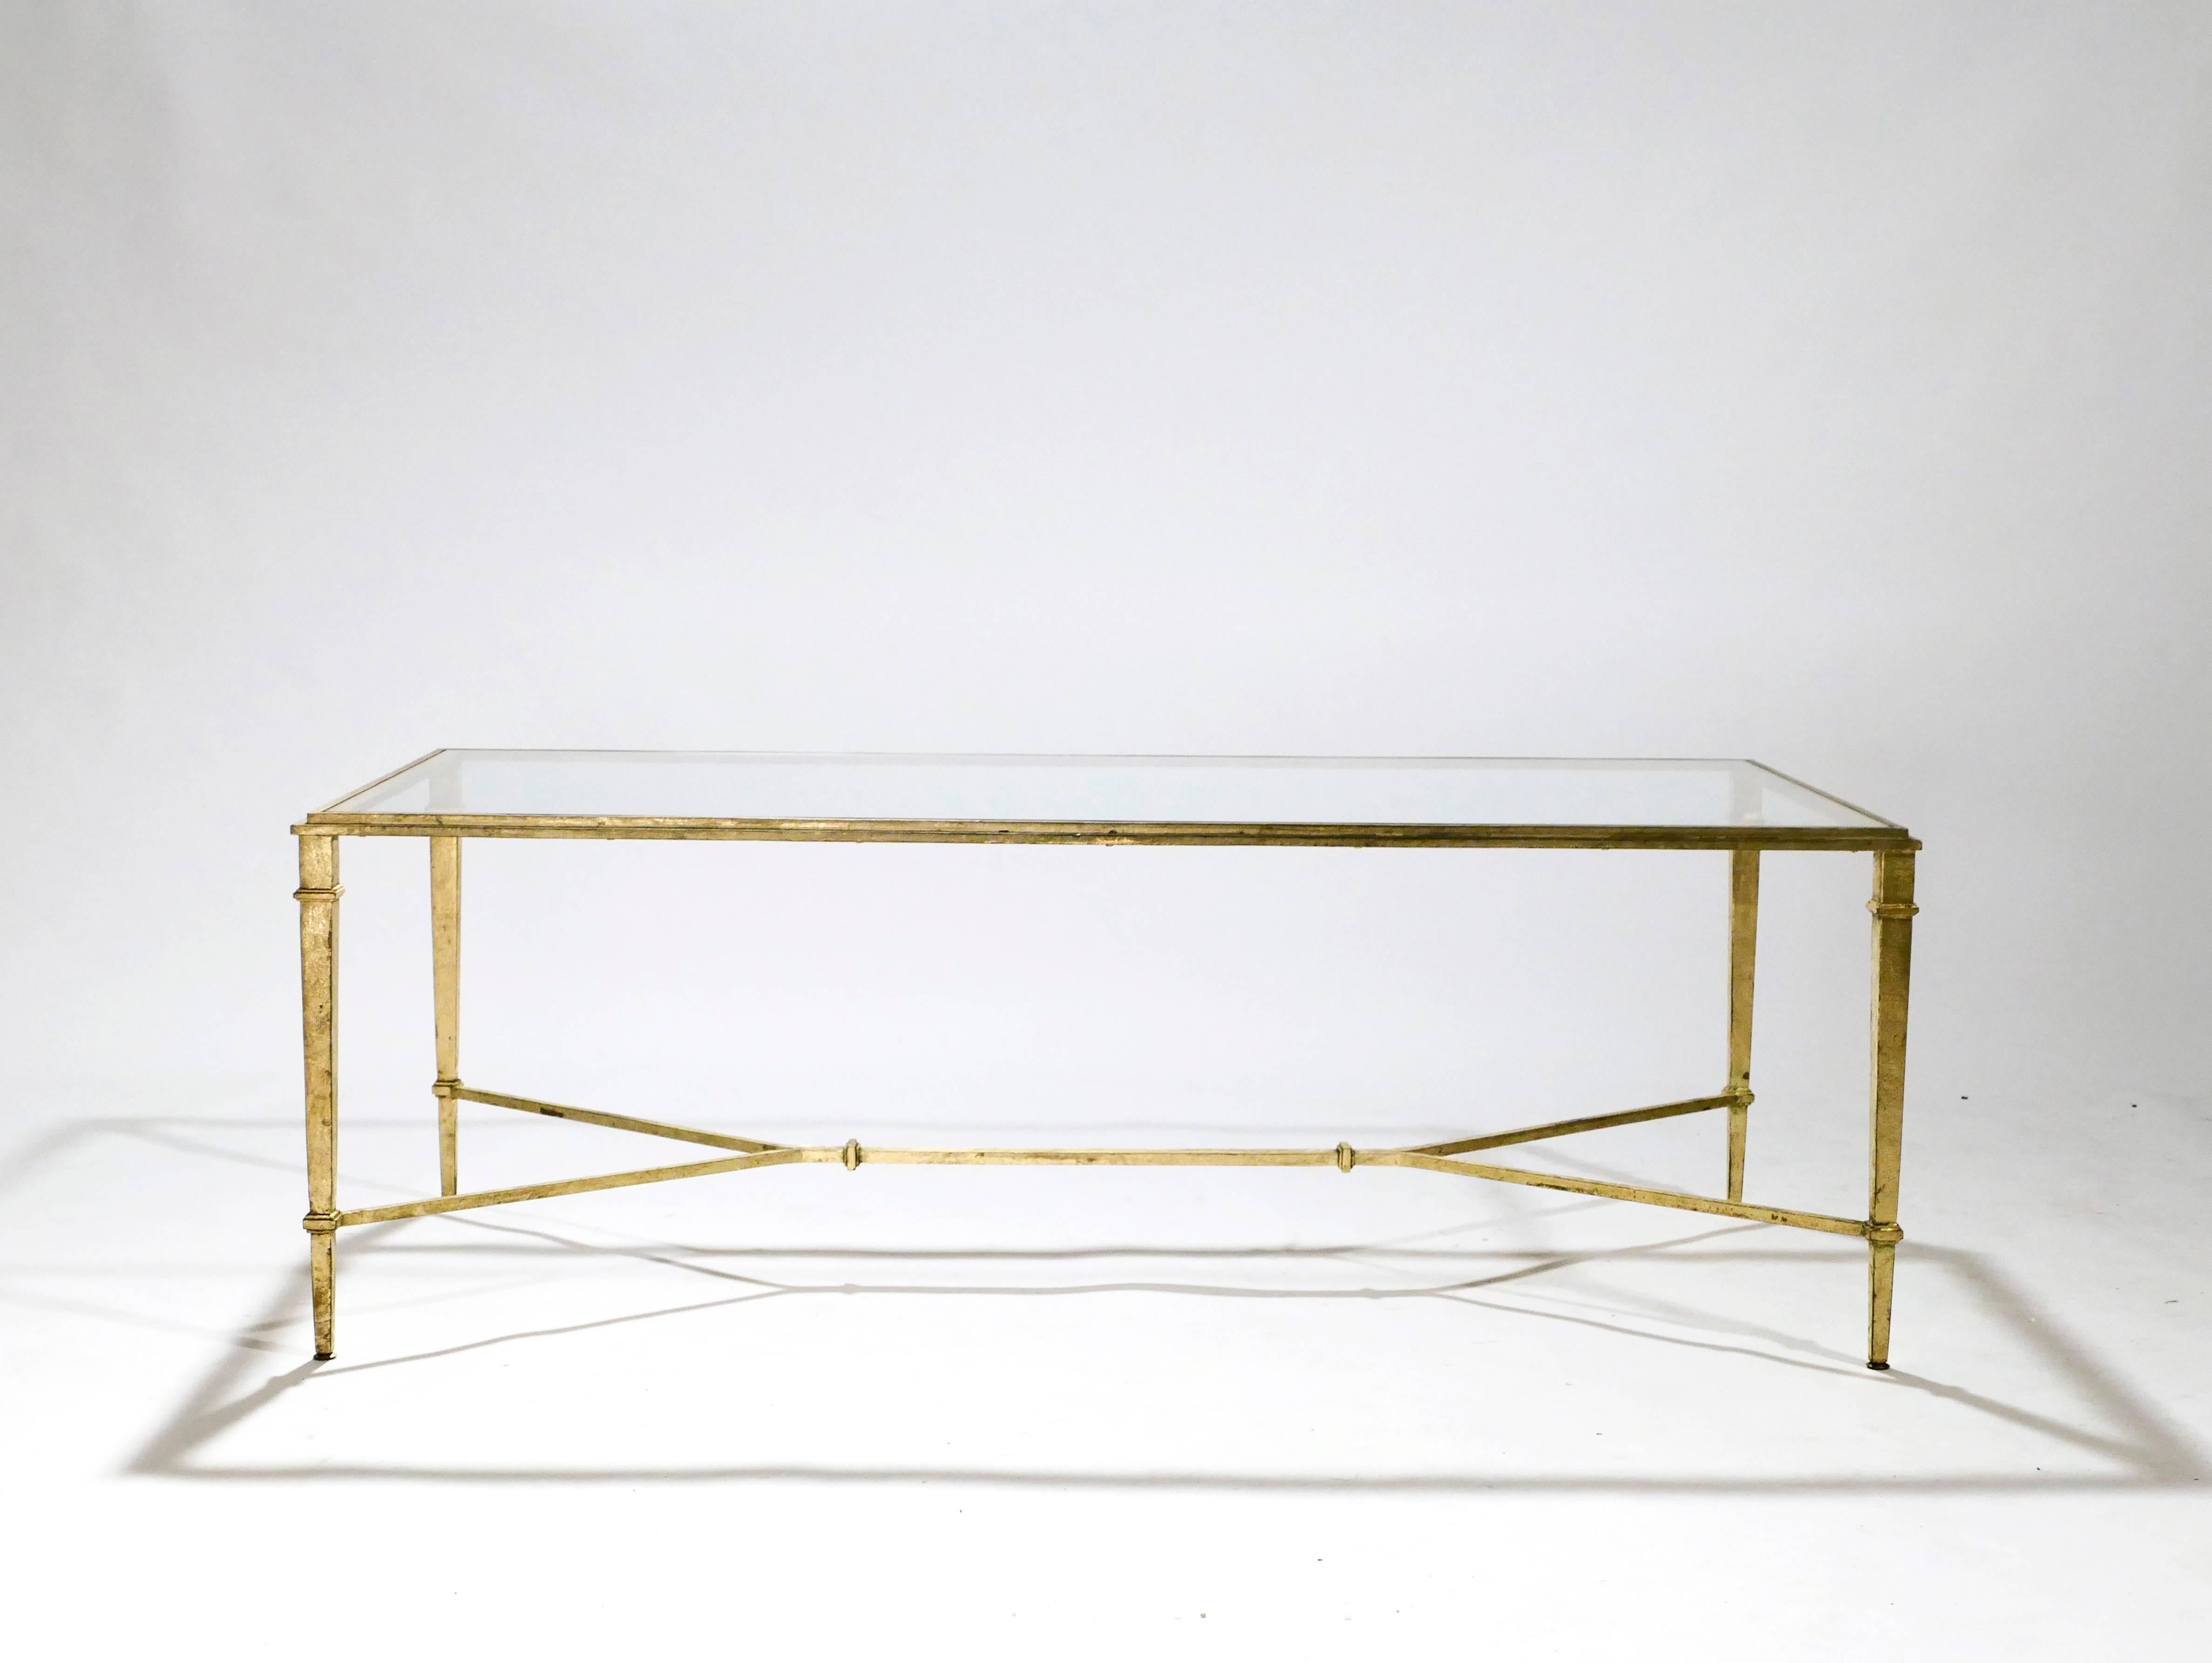 Grace your home with the true elegance of this coffee table signed and stamped by Robert Thibier. Glittering in an antiqued gold gilt finish, this iron craft coffee table adds a glam twist which makes a gracious compliment to both traditional and